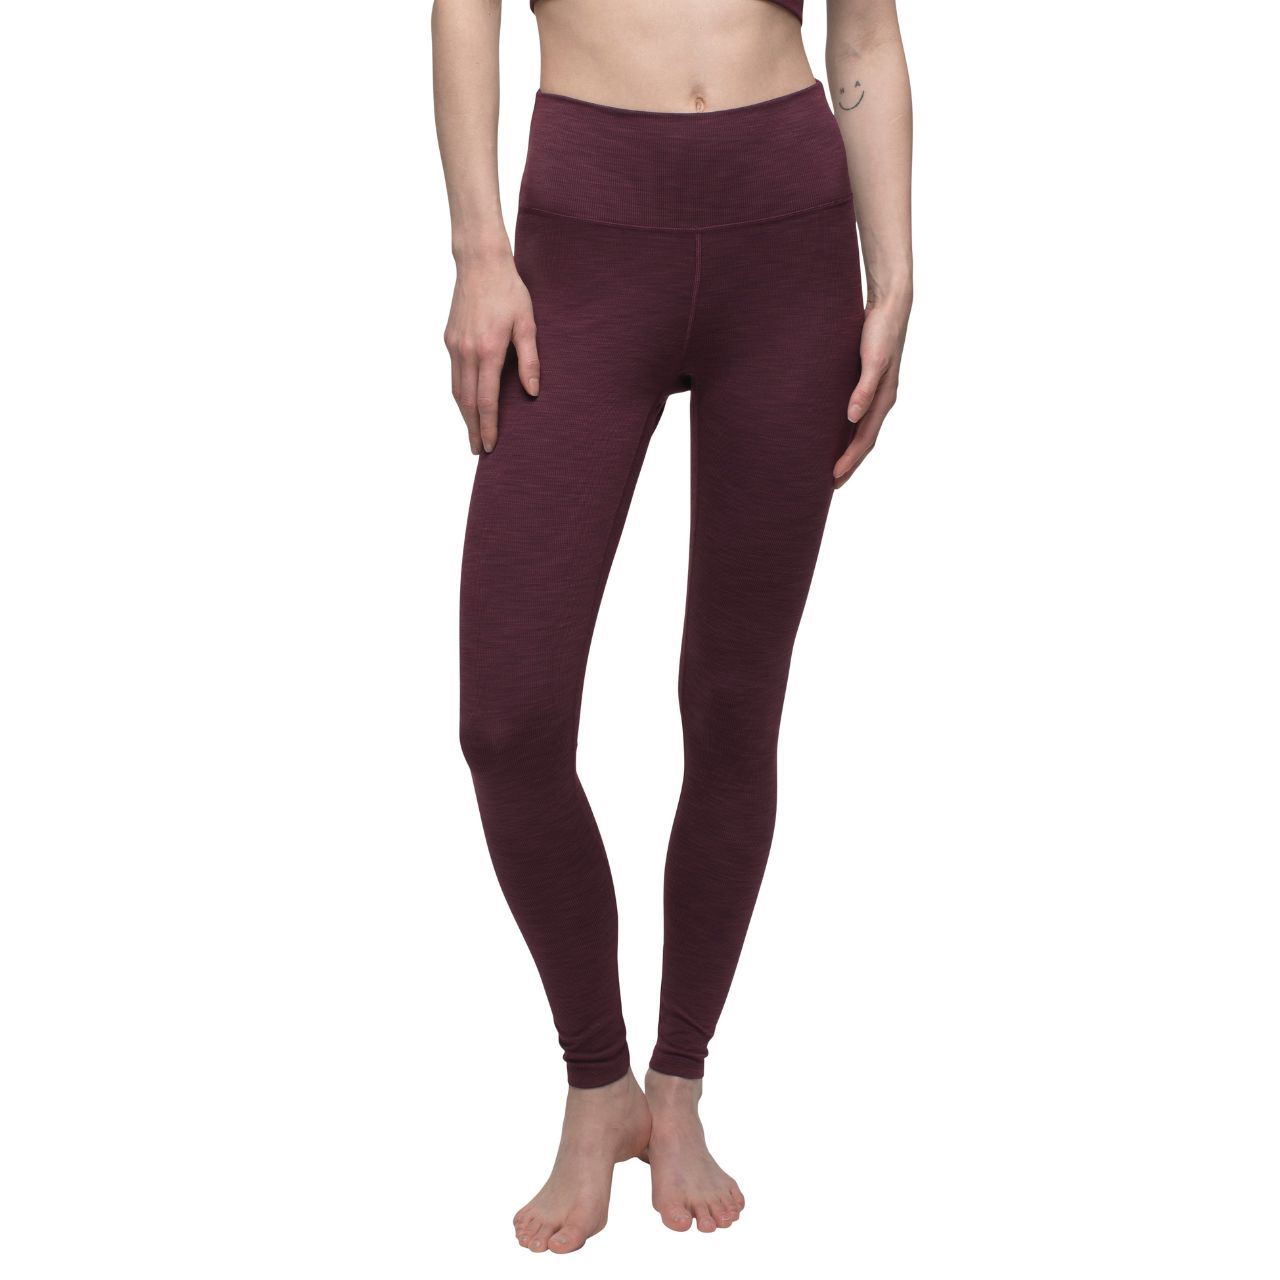 prAna Becksa 7/8 Legging Pants, Flannel Heather, Medium, — Womens Clothing  Size: Medium, Inseam Size: 25 in, Gender: Female, Age Group: Adults —  W41180589-FLHT-M - 1 out of 3 models